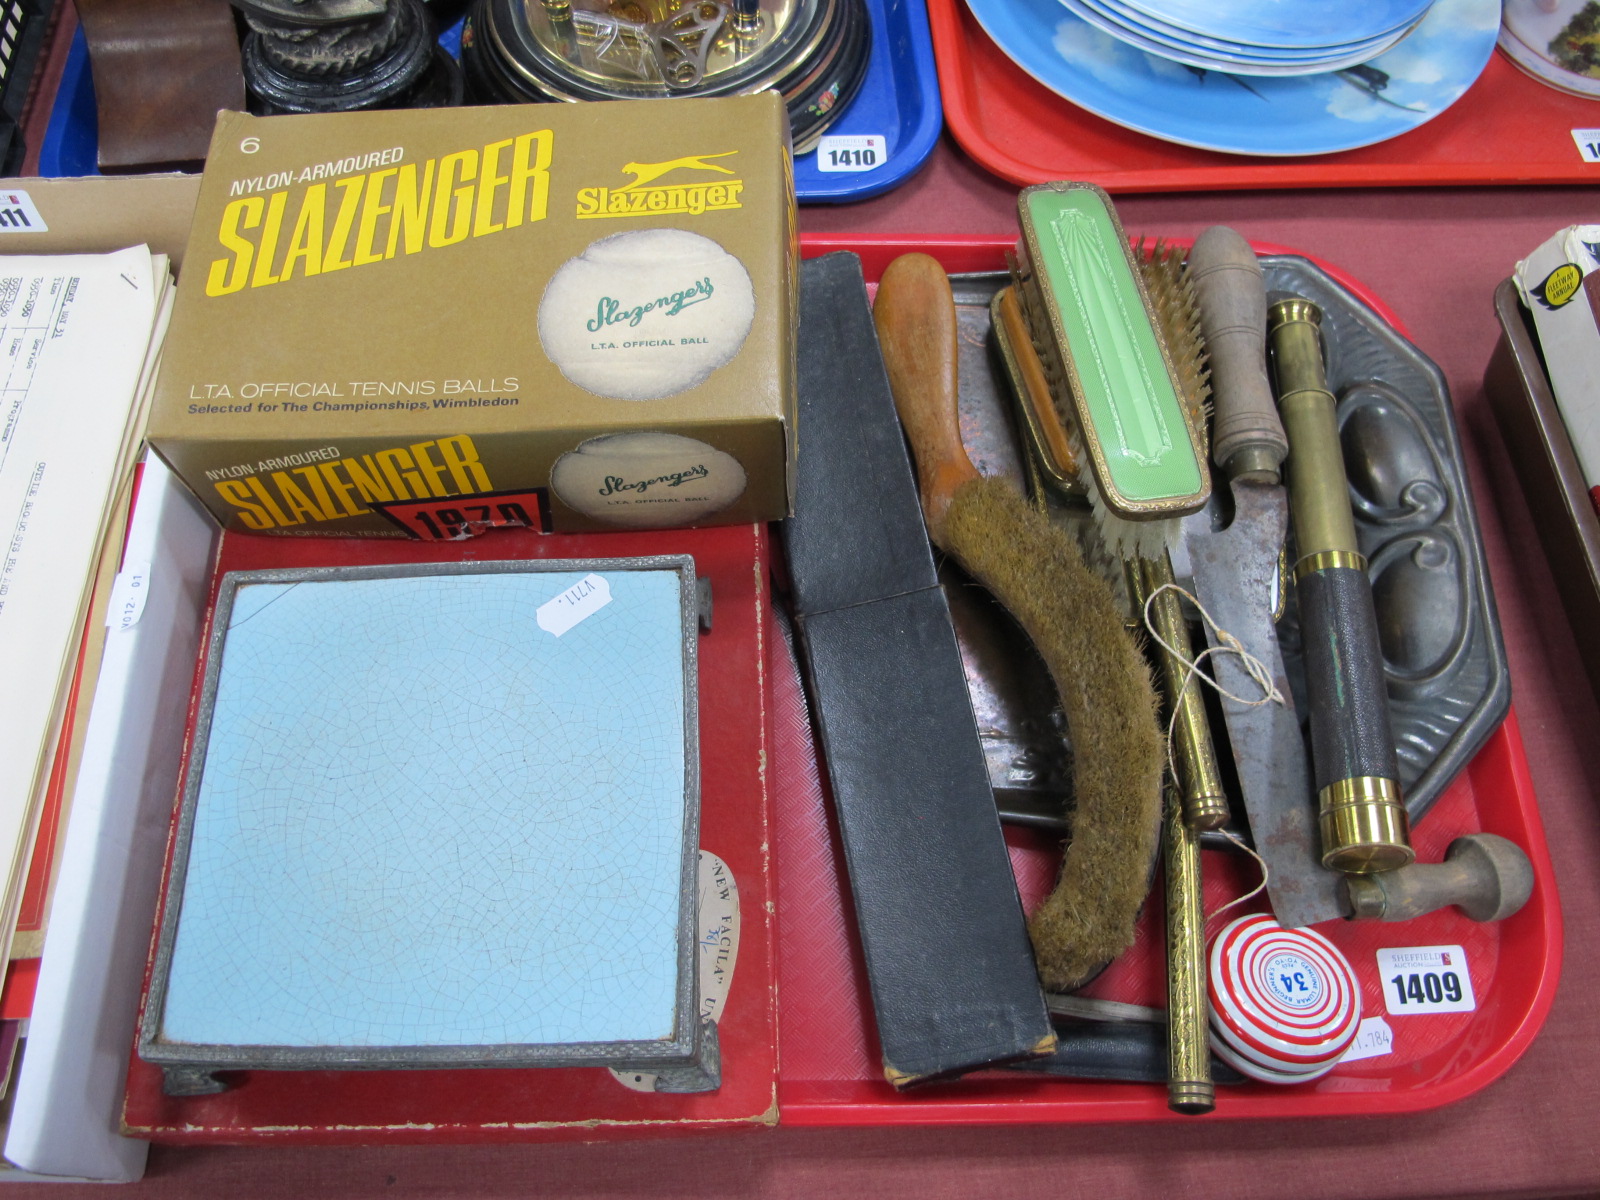 A Set Square, herb cutter, crumb tray and brush, dressing mirror and brushes, telescope, Yoyo,